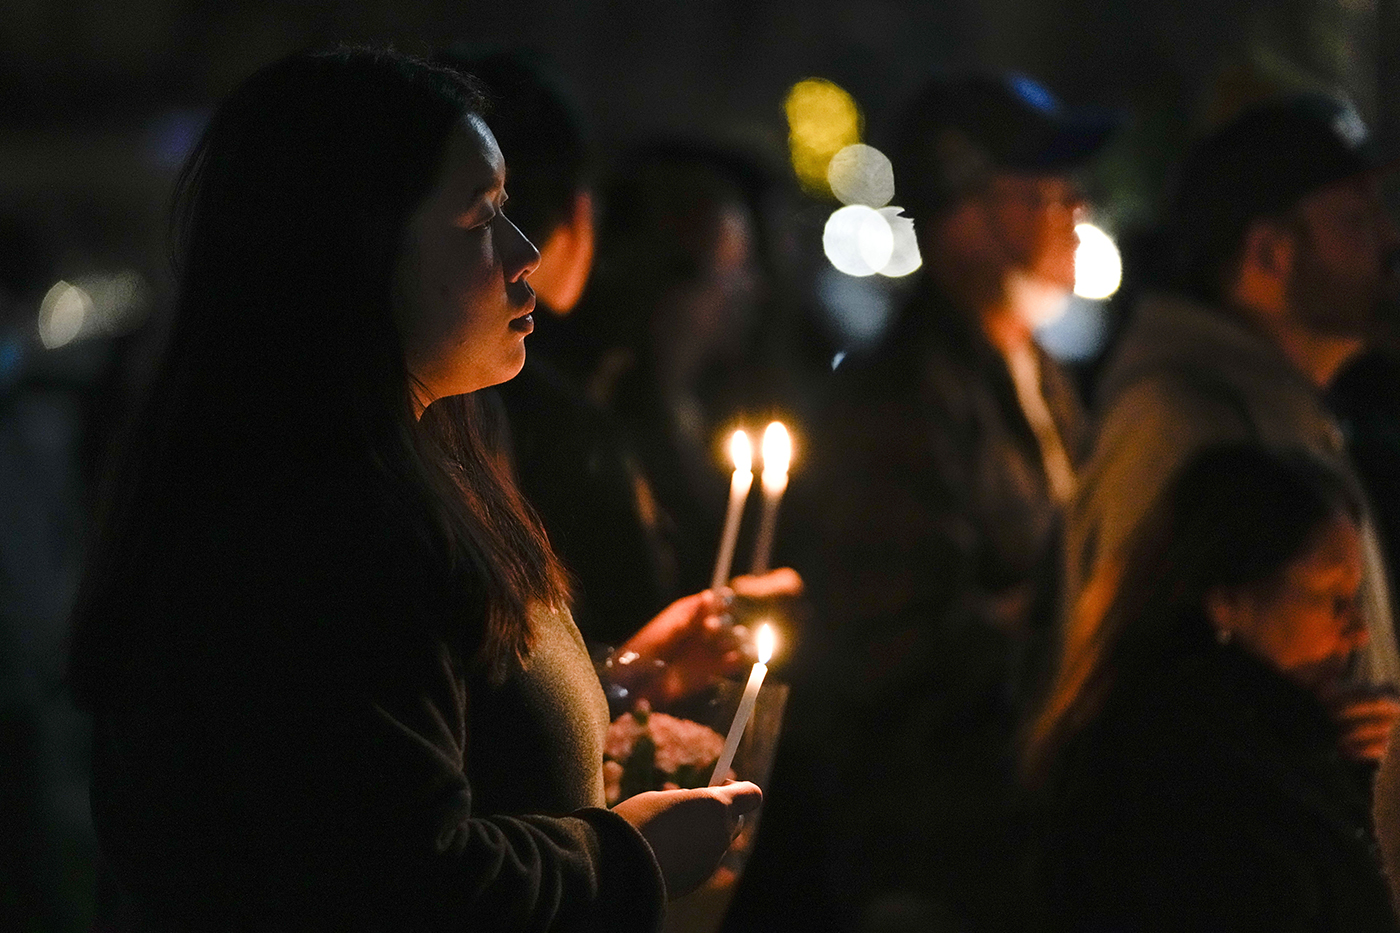 People gathered outside holding candles in the dark